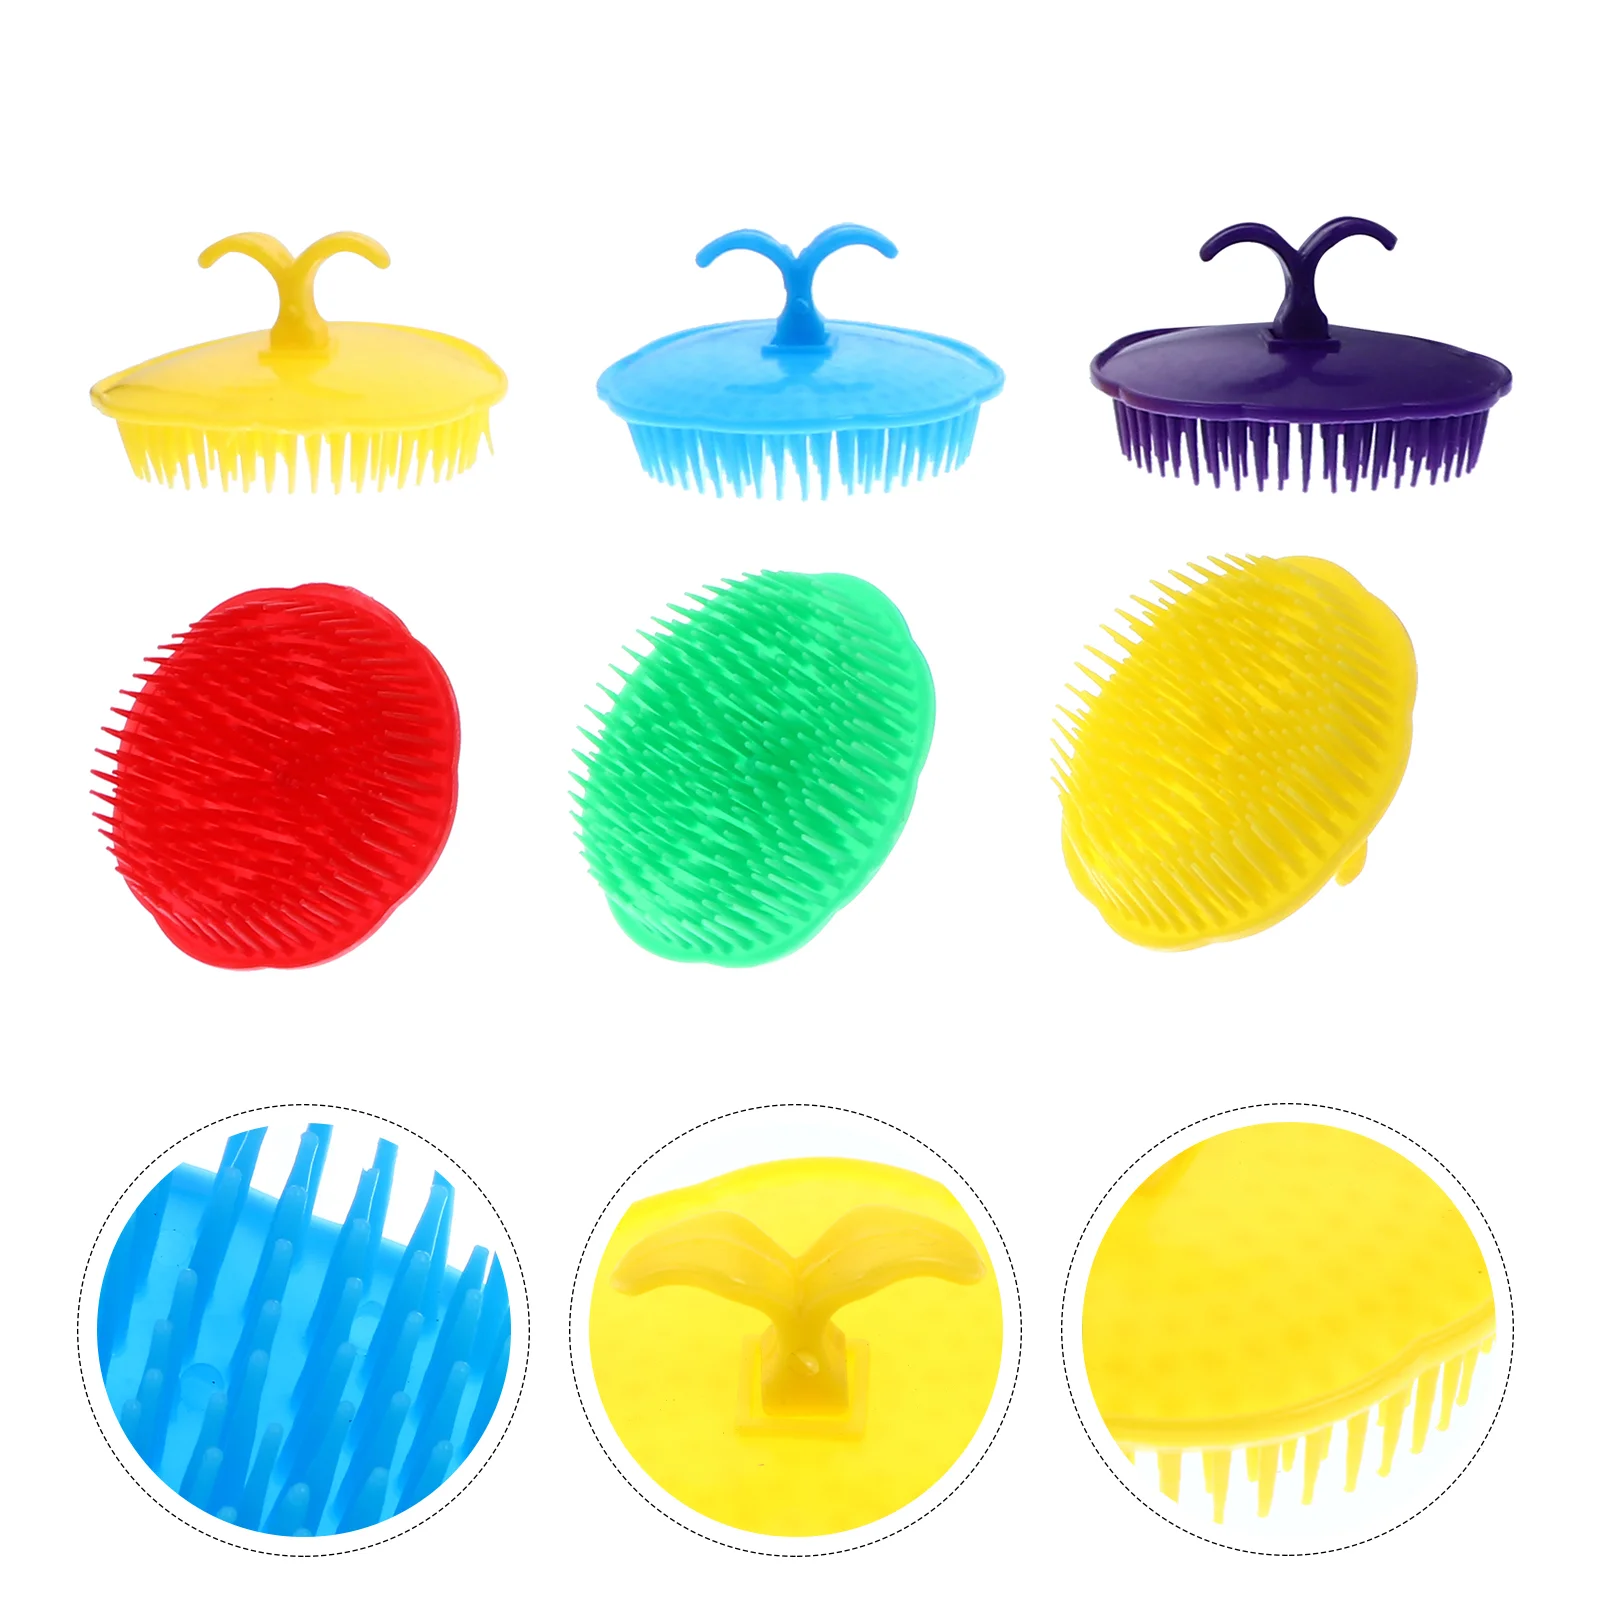 

Scalp Brush Hair Combs Scrubber Shower Shampoo Scrubbers Dandruff Flexible Cleaning Practical Portable Home Care Travel